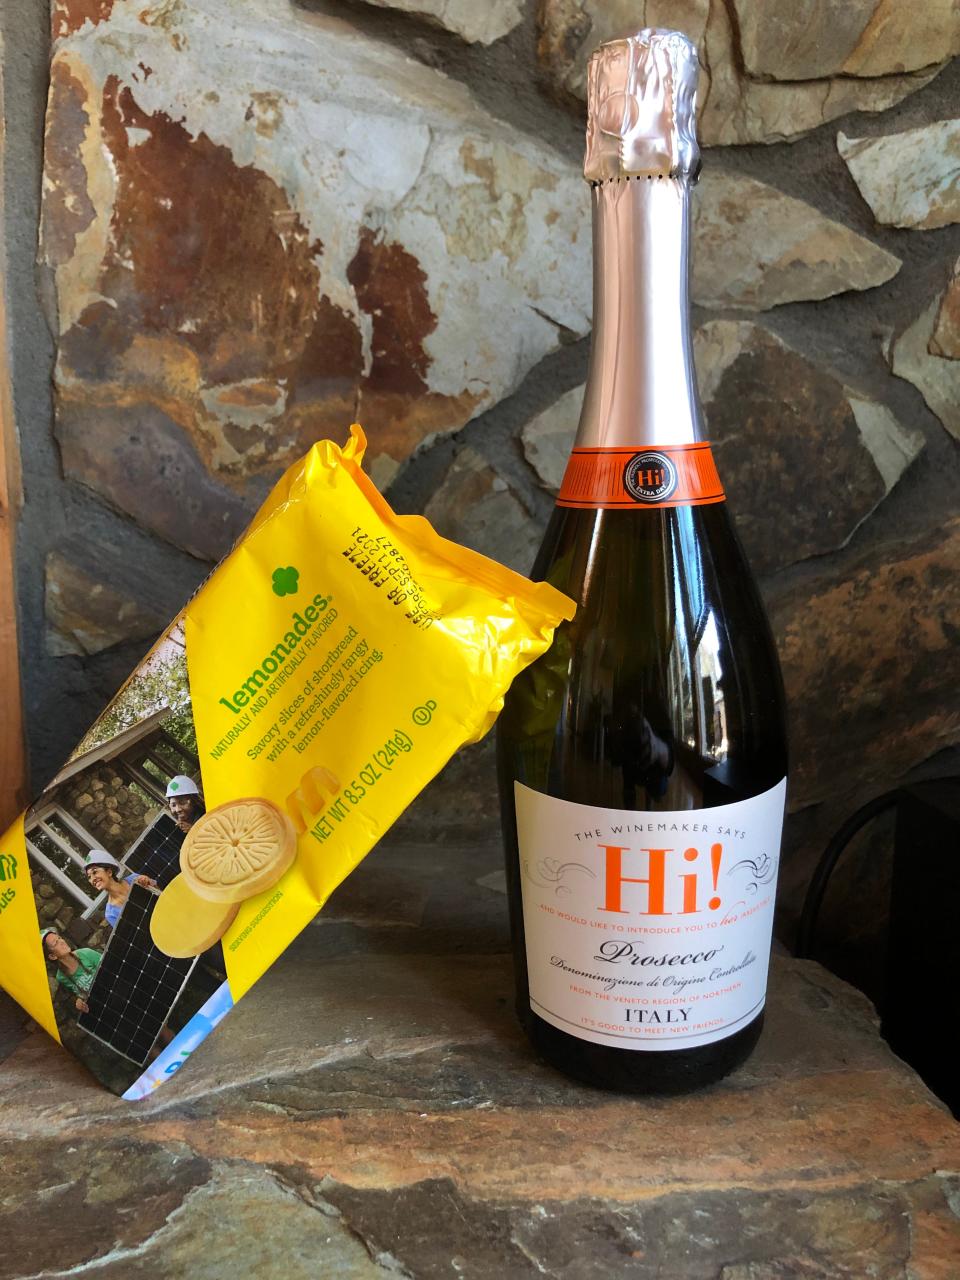 The bubbles of Hi! Prosecco complement the citrus flavors of Girl Scout Lemonades cookies. Think mimosas and brunch.